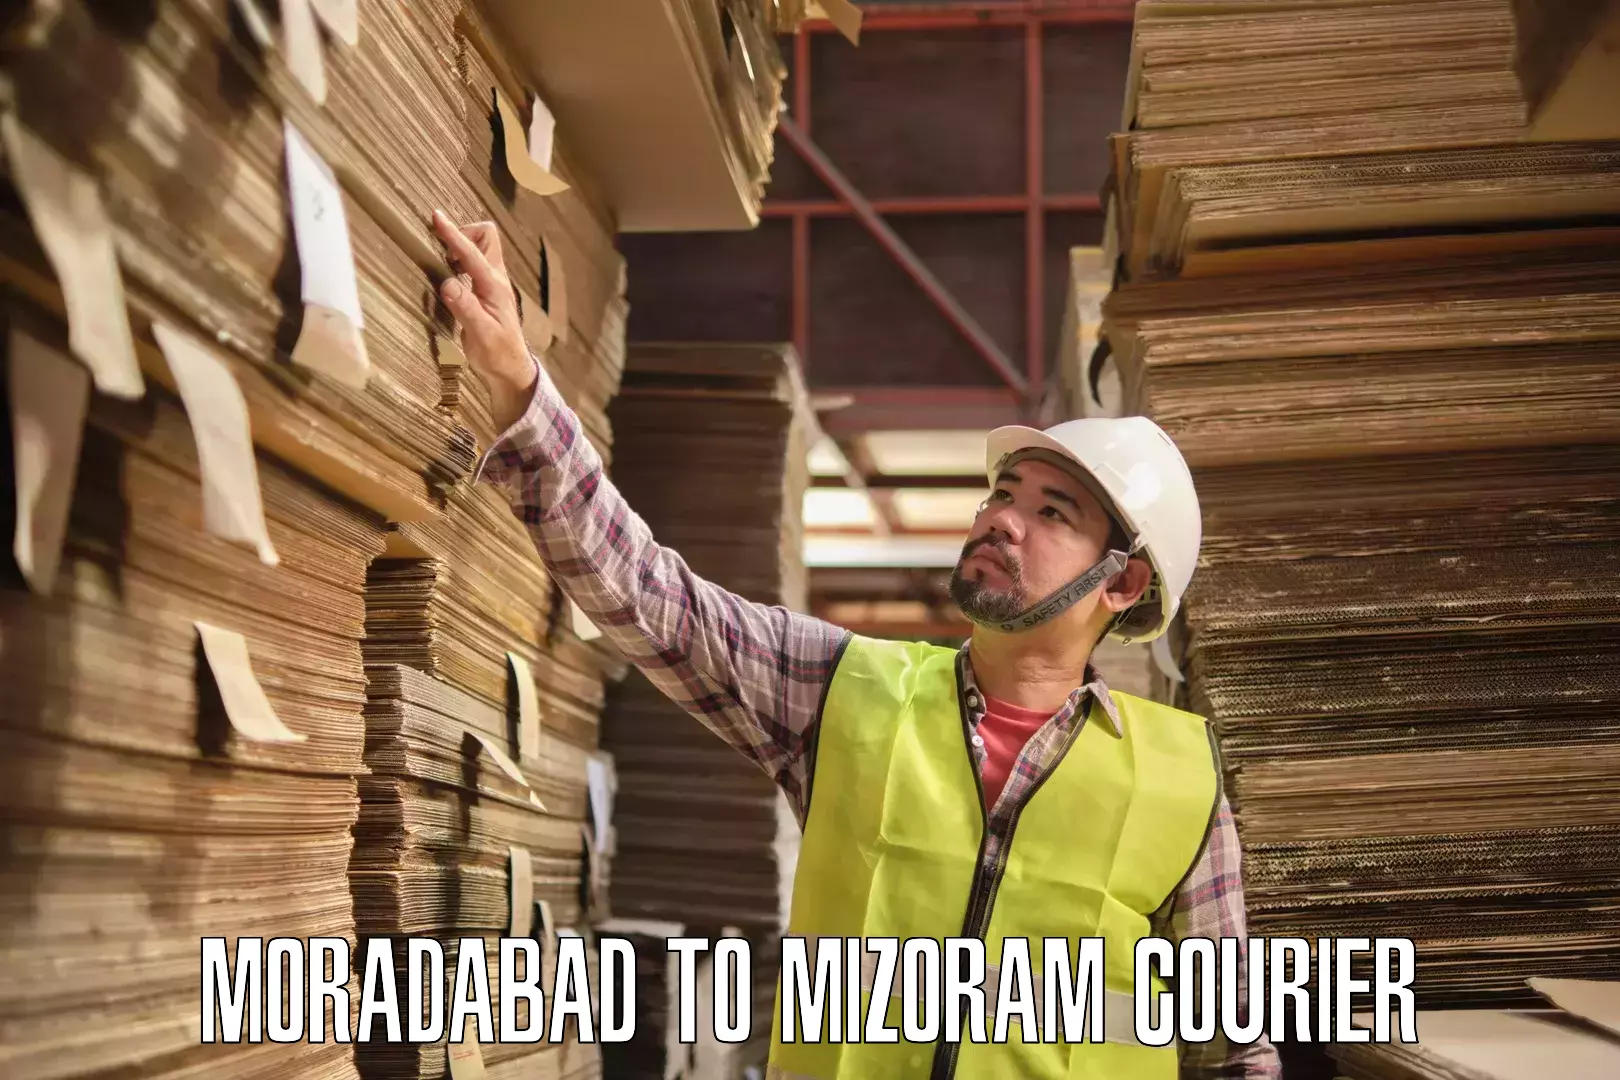 State-of-the-art courier technology Moradabad to Mizoram